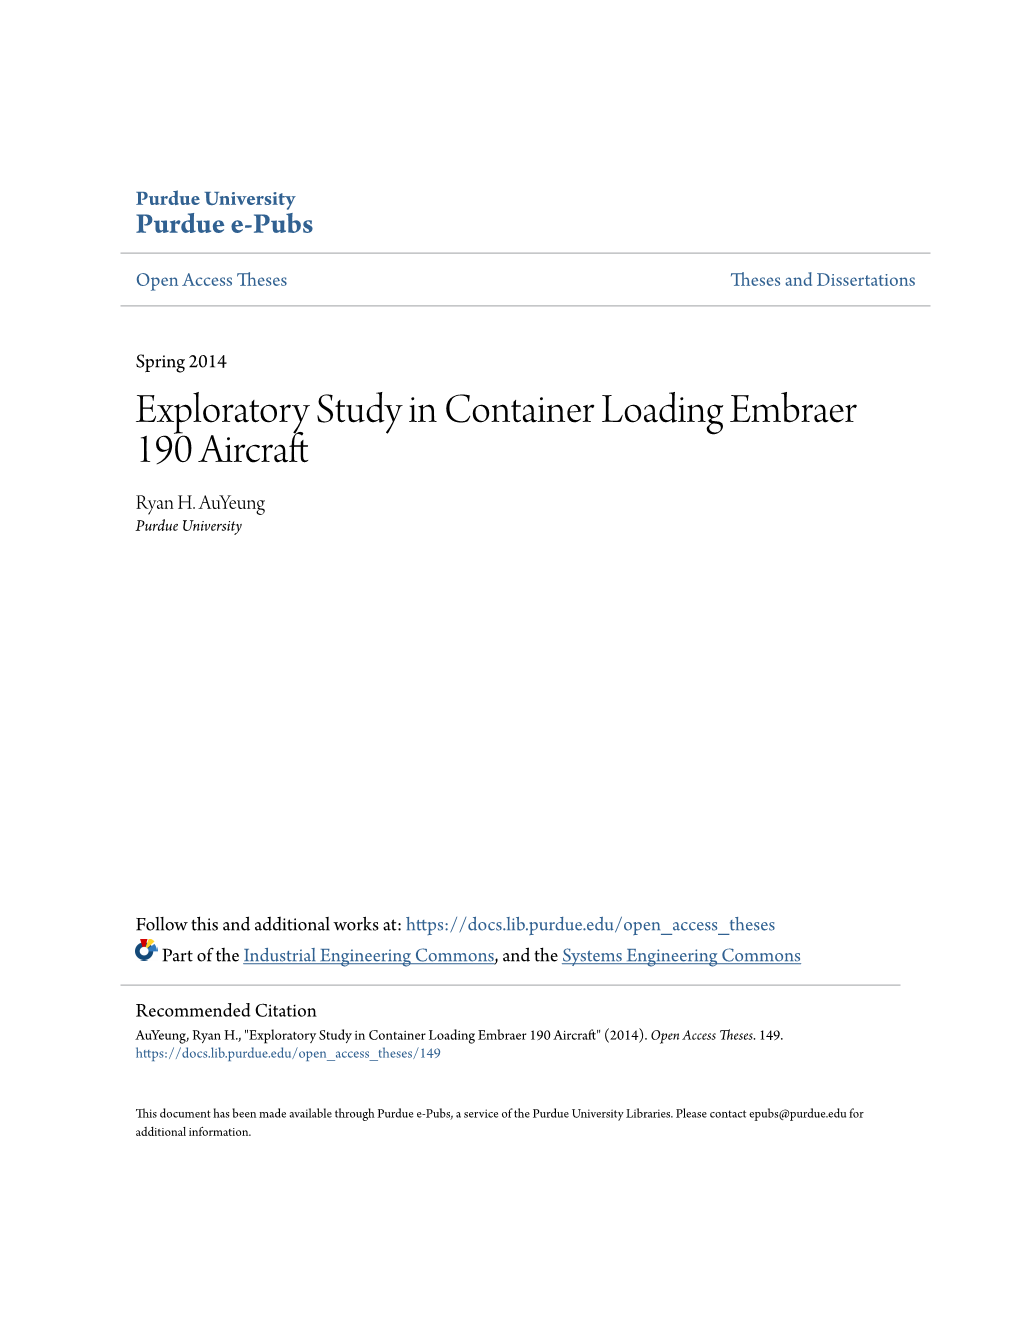 Exploratory Study in Container Loading Embraer 190 Aircraft Ryan H